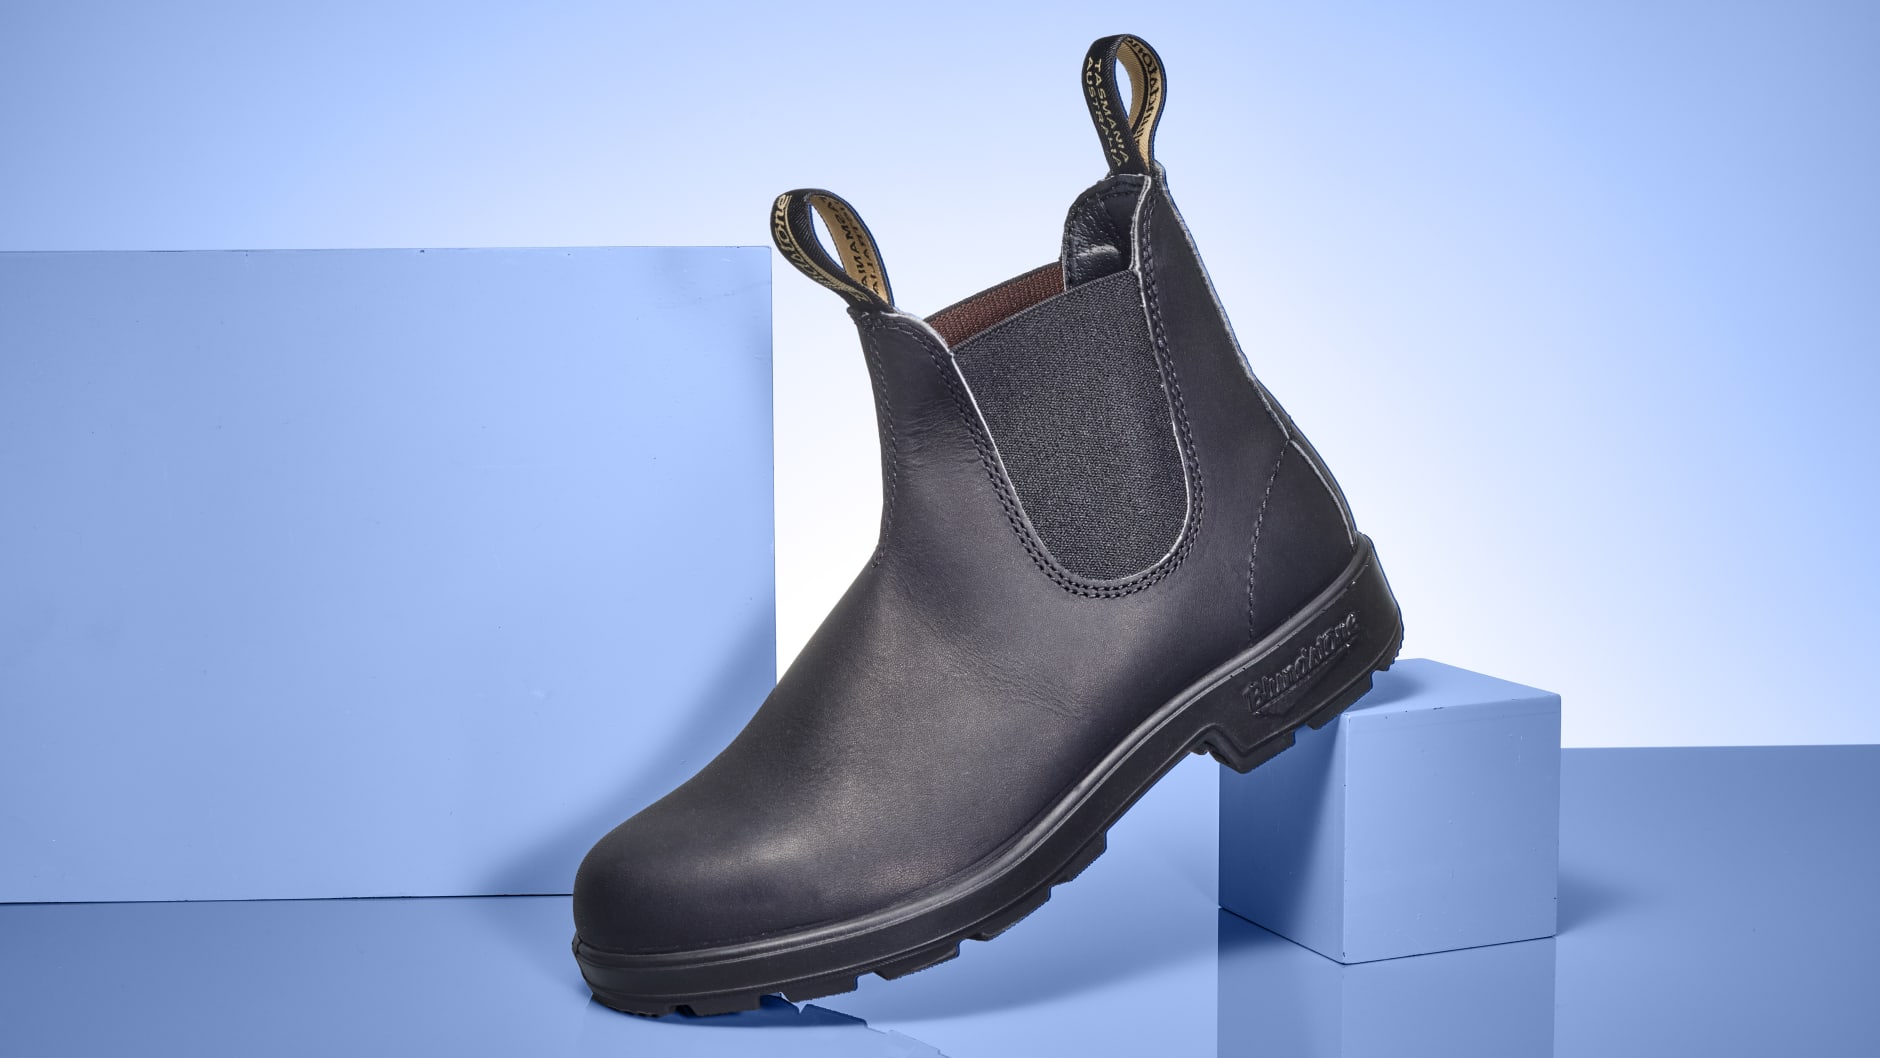 Blundstone 510 Chelsea Boots Review - Buy Side from WSJ